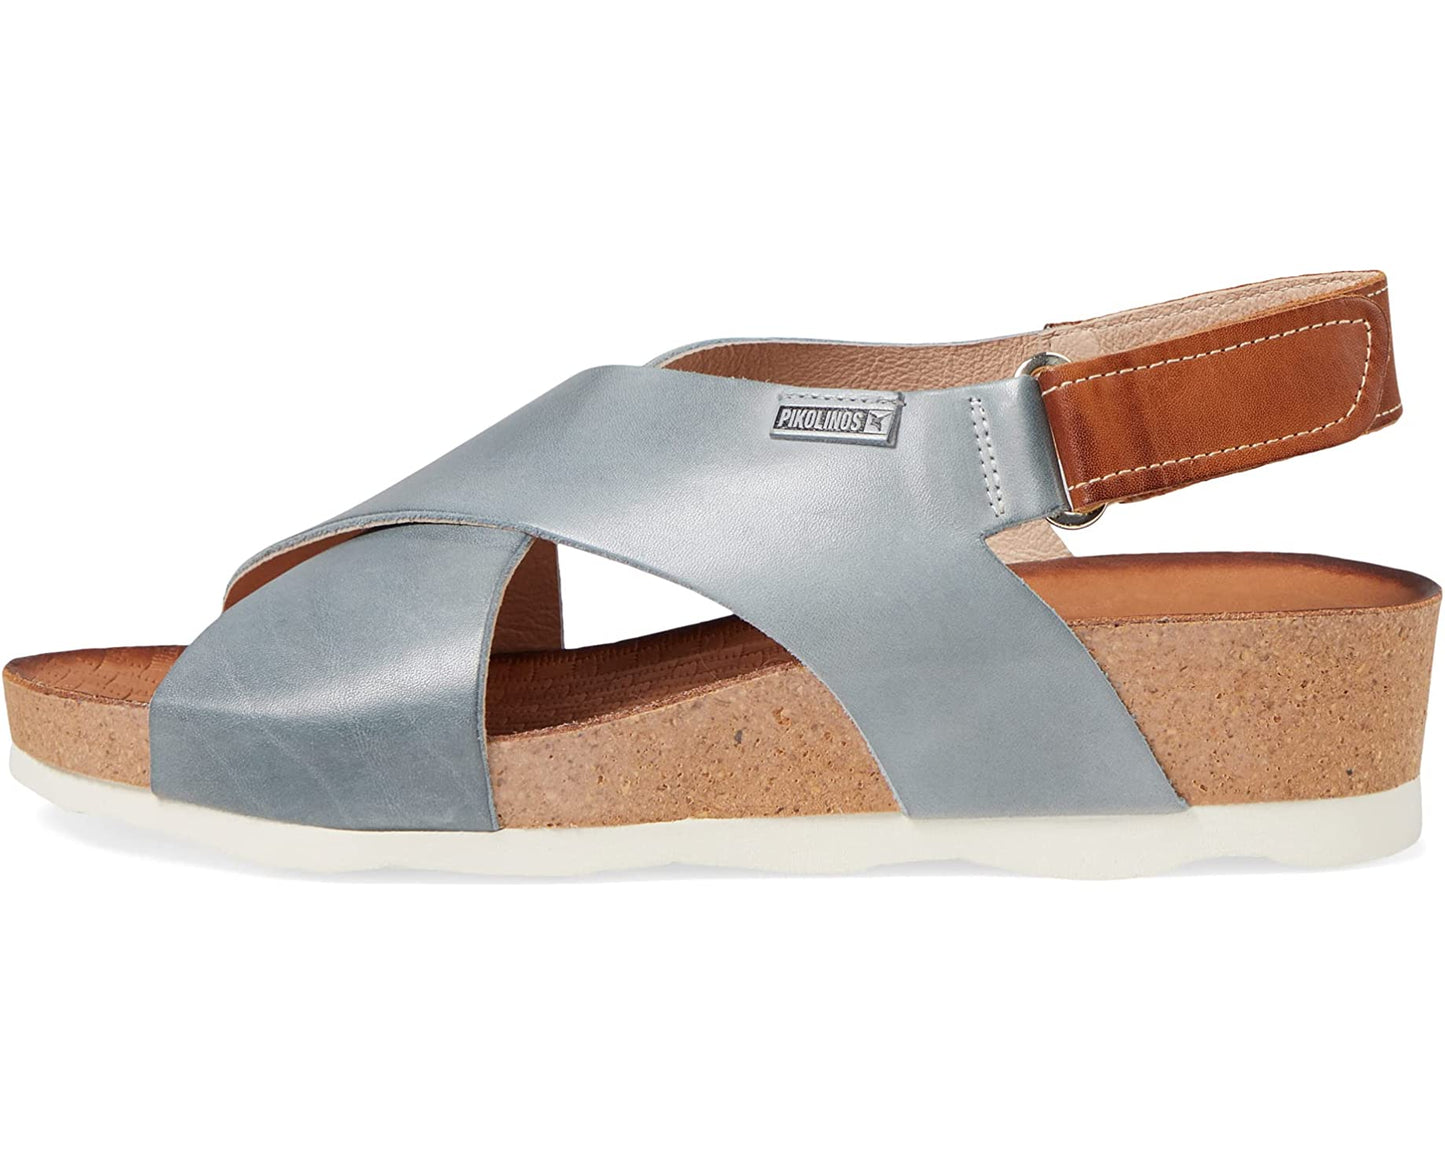 Mahon Cross-Strapped Sandals